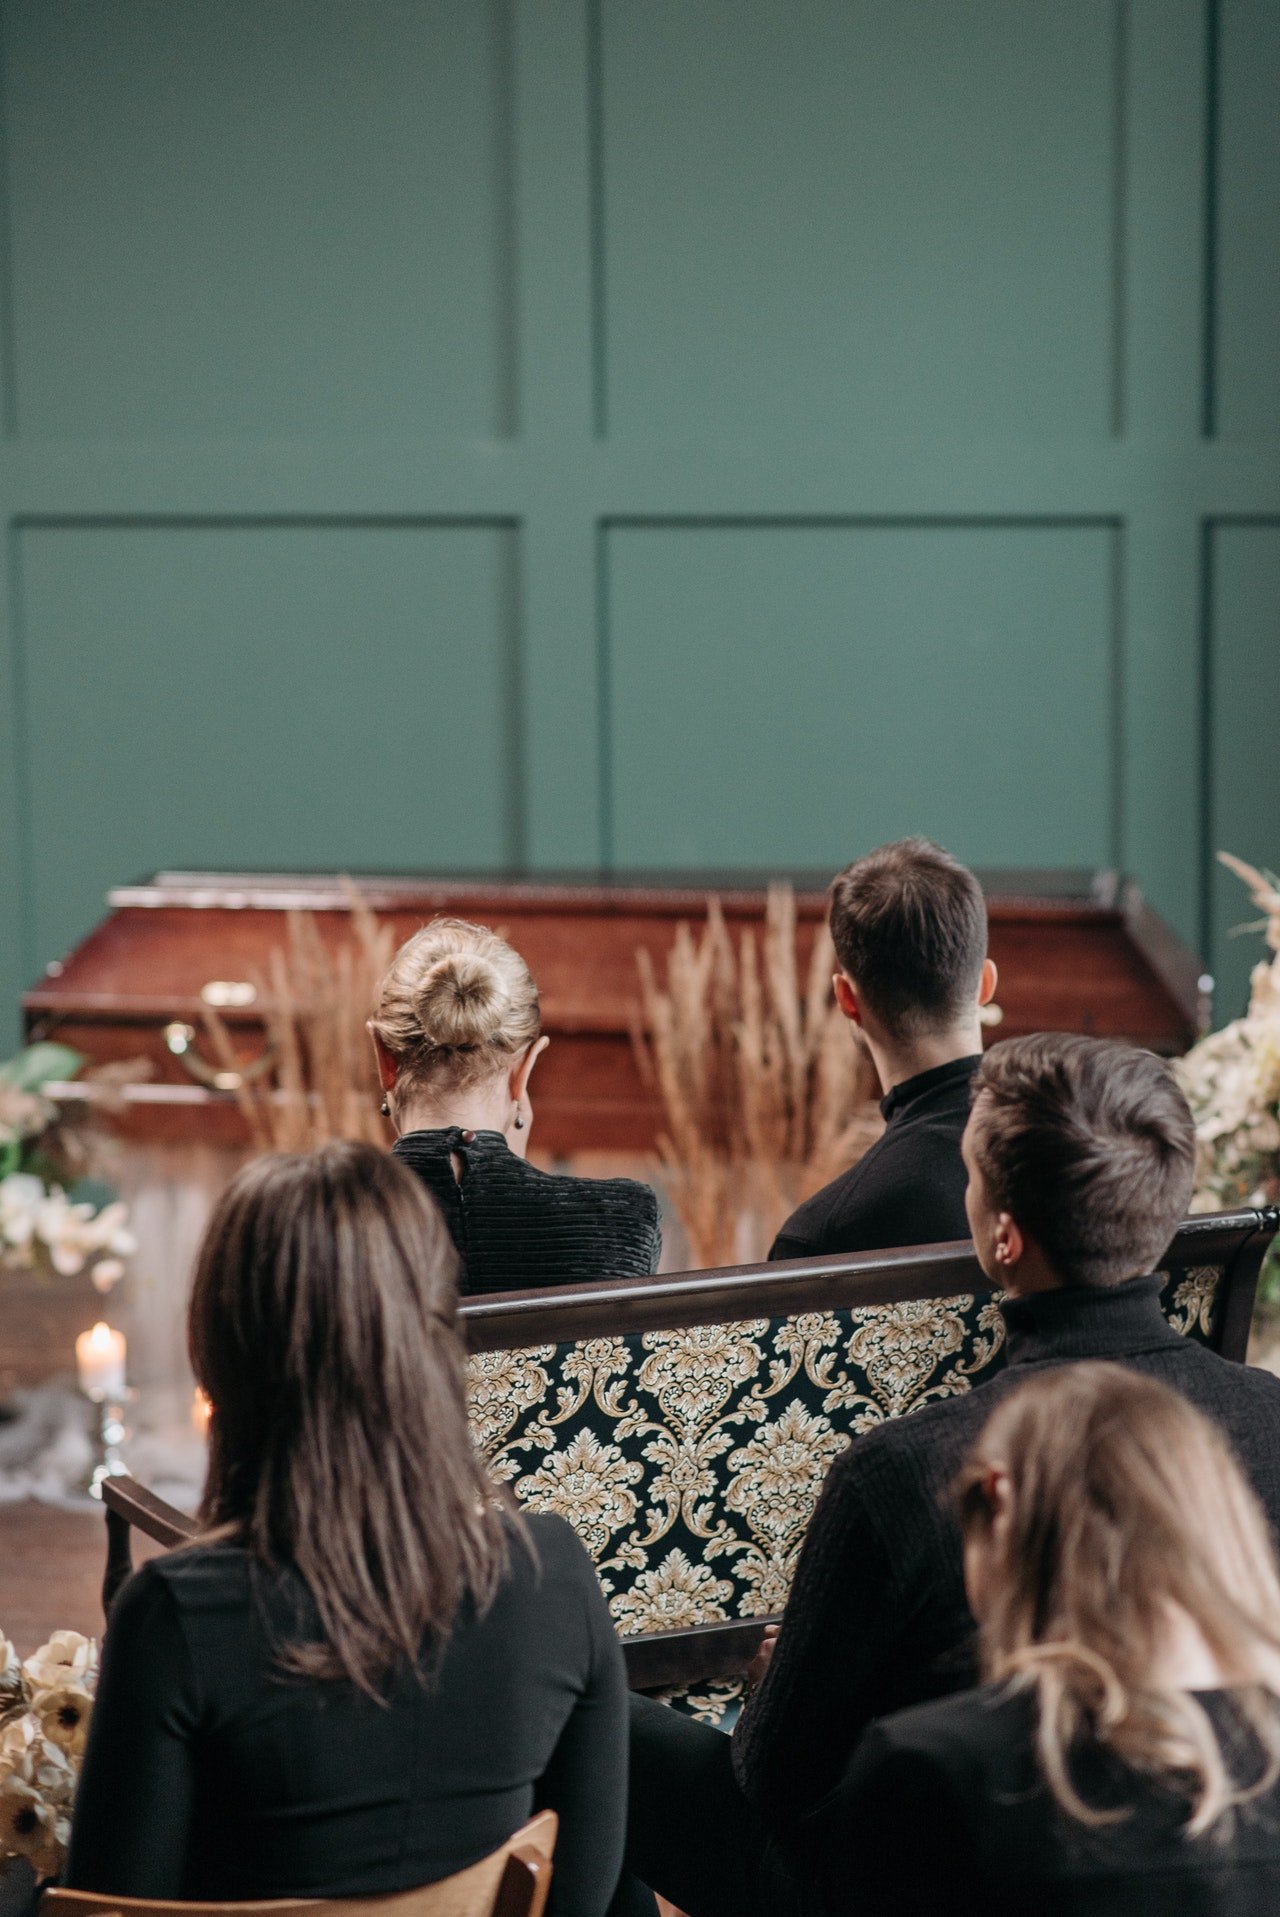 They all cried at the funeral, regretting their words at the hospital. | Source: Pexels